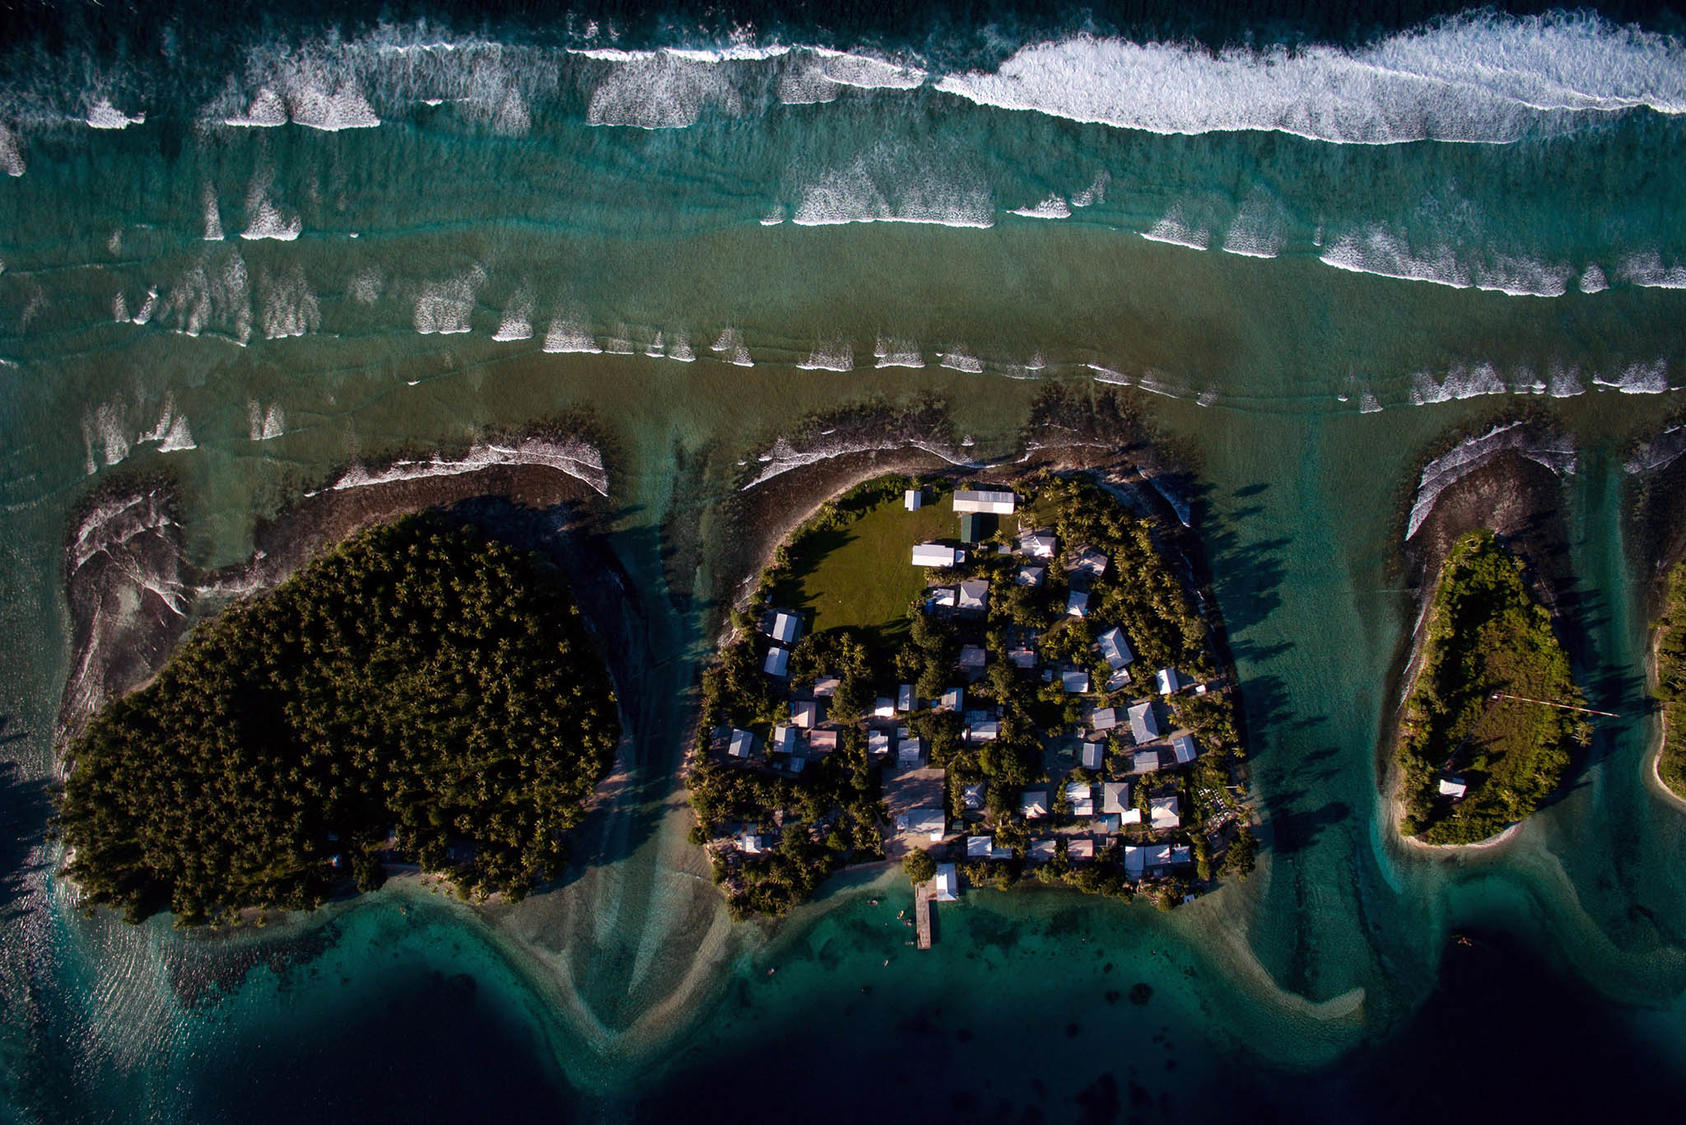 Homes on Ejit, an islet in the Majuro Atoll of the Marshall Islands, are under threat from rising seas, October 29, 2015. (Josh Haner/The New York Times)